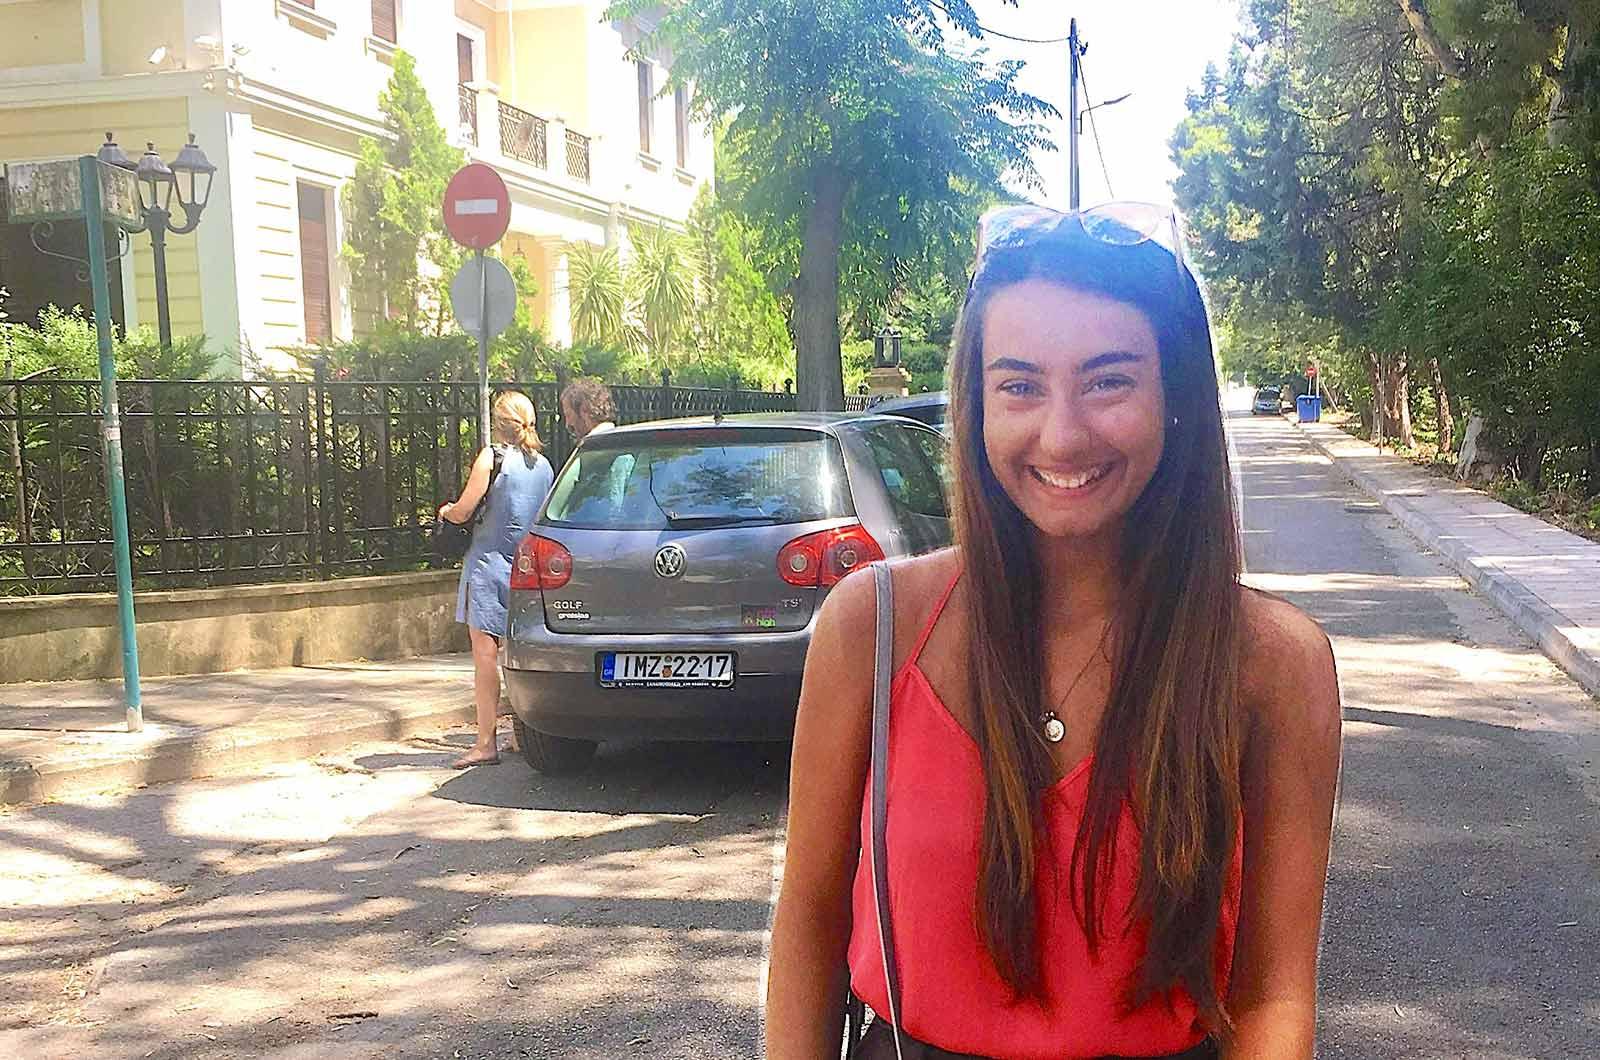 Student from the University of Maryland poses on street of a European city